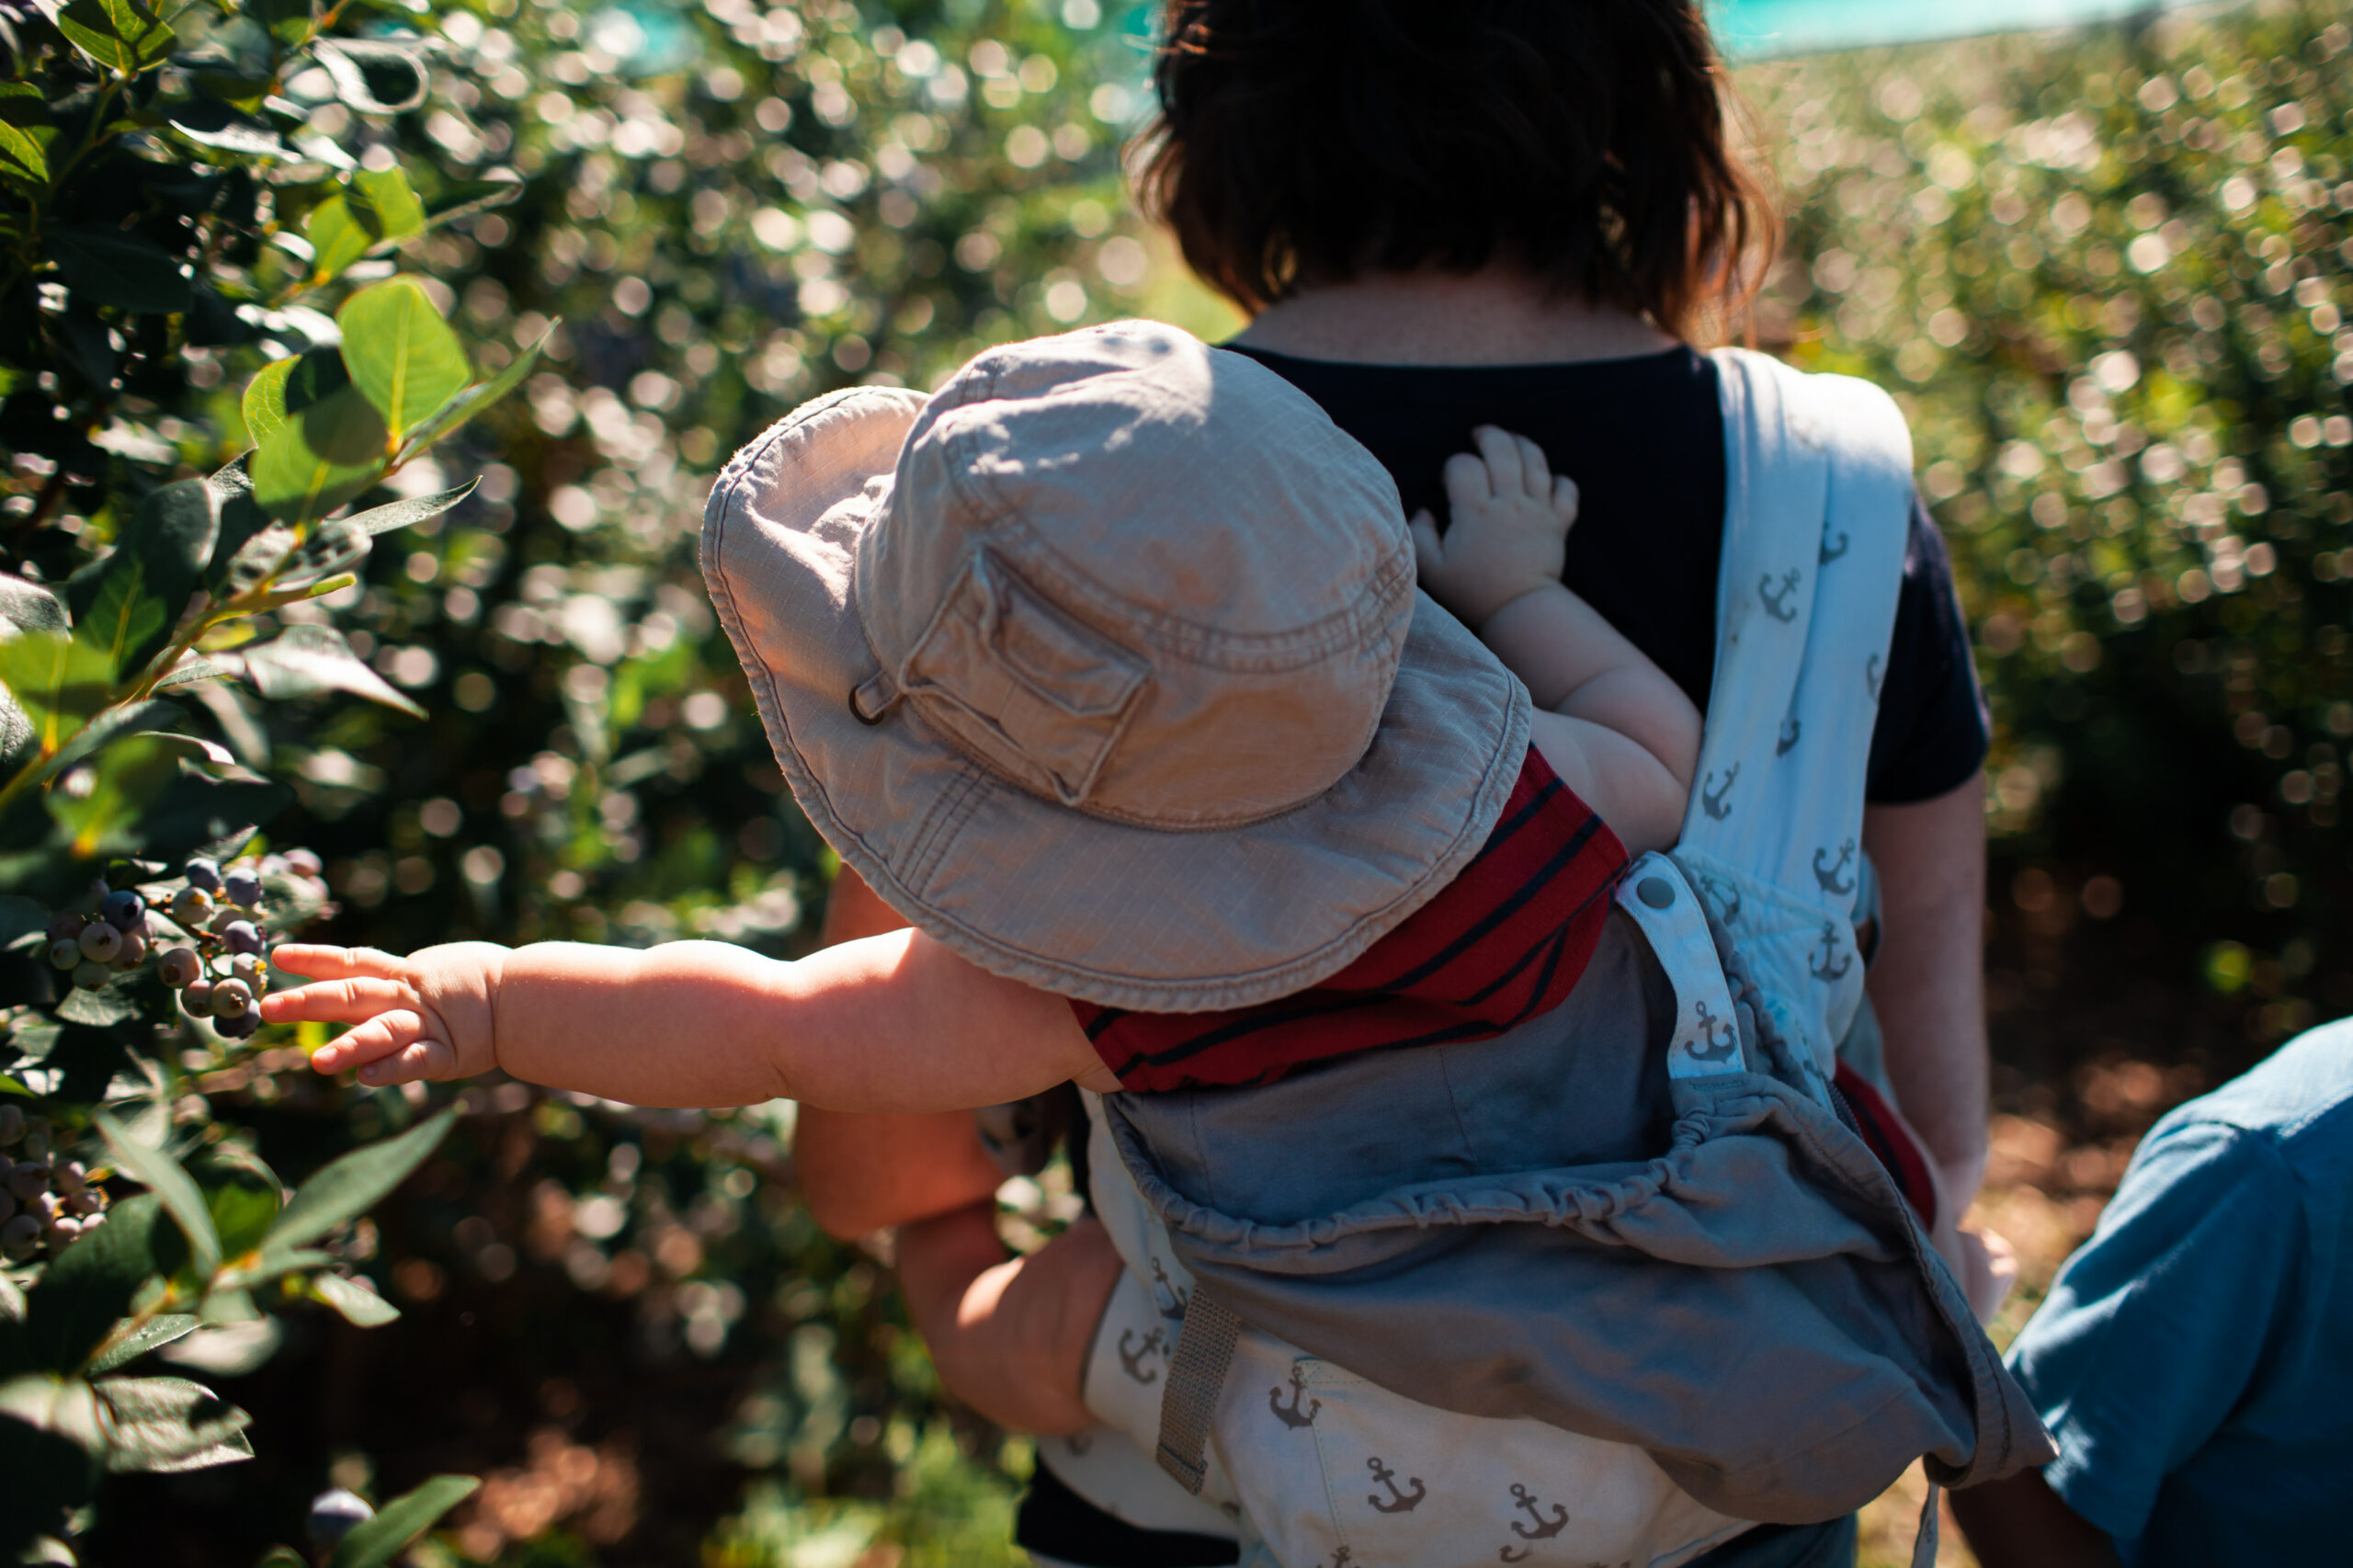 A baby wearing a wide-brim hat and strapped to a woman's back reaches to the left to grab blueberries from a blueberry bush.